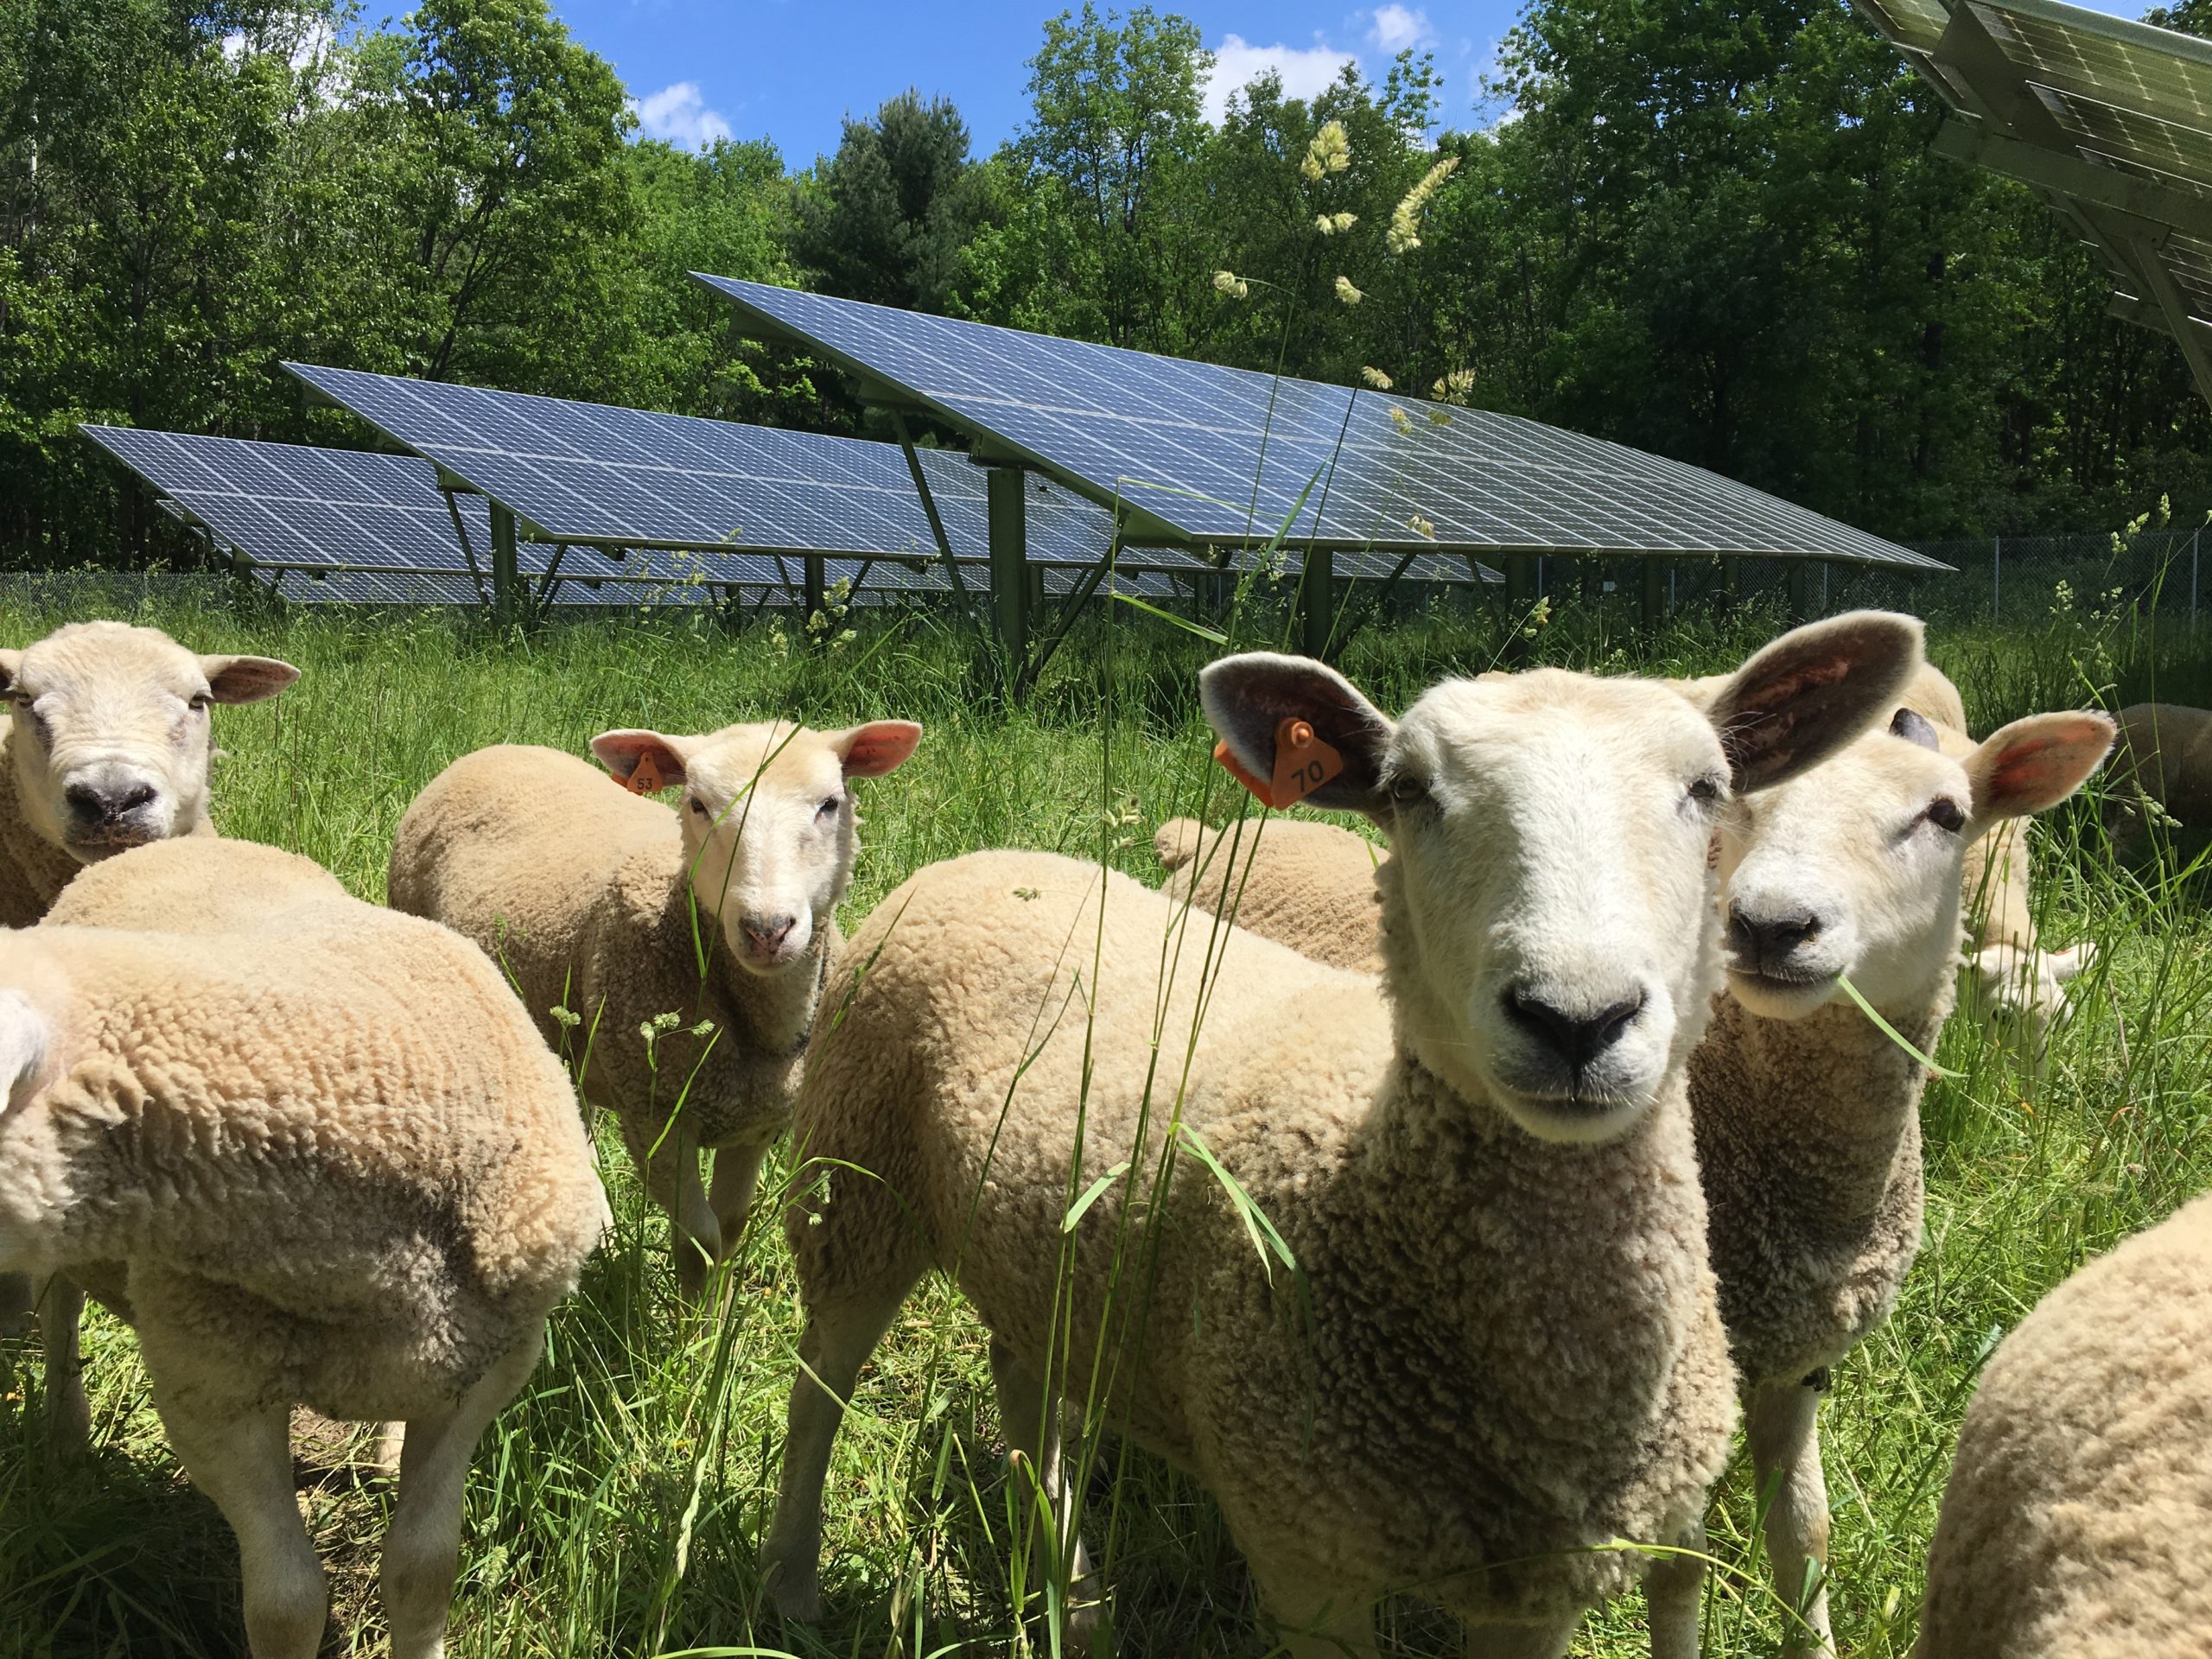 A flock of sheep stand in a pasture with solar panels in the background.